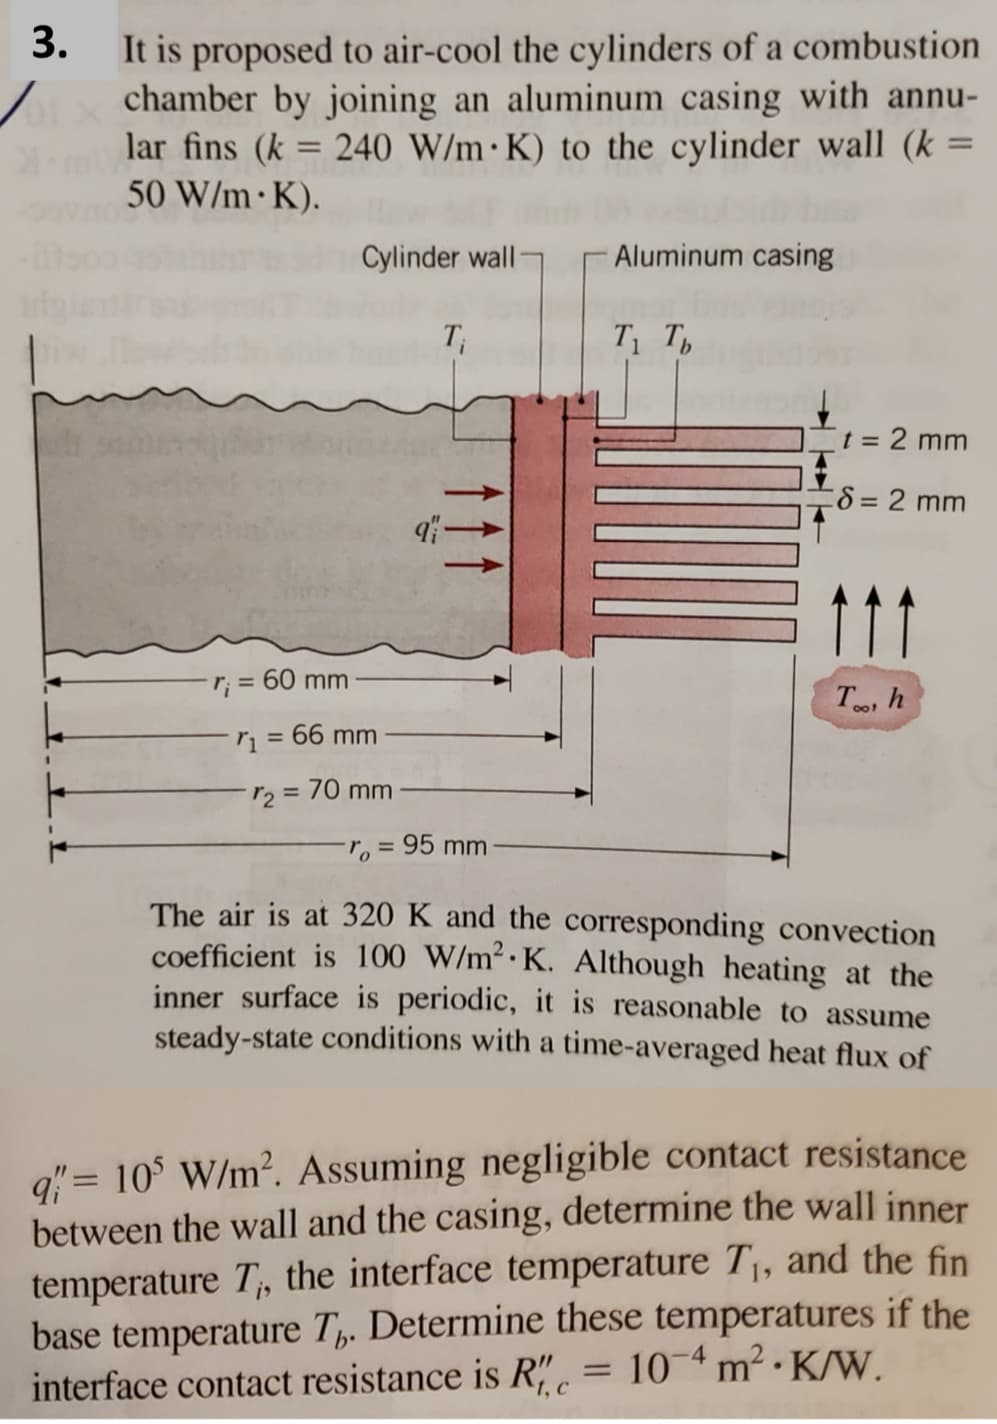 3.
It is proposed to air-cool the cylinders of a combustion
chamber by joining an aluminum casing with annu-
lar fins (k = 240 W/m K) to the cylinder wall (k =
50 W/m K).
r₁ = 60 mm
Cylinder wall
= 66 mm
r₂ = 70 mm
T₁
-ro=
9-
= 95 mm
Aluminum casing
T₁ Tb
=
t = 2 mm
8 = 2 mm
Too, h
The air is at 320 K and the corresponding convection
coefficient is 100 W/m² K. Although heating at the
inner surface is periodic, it is reasonable to assume
steady-state conditions with a time-averaged heat flux of
q" = 105 W/m². Assuming negligible contact resistance
between the wall and the casing, determine the wall inner
temperature T, the interface temperature T₁, and the fin
base temperature Th. Determine these temperatures if the
10-4 m² K/W.
interface contact resistance is Re